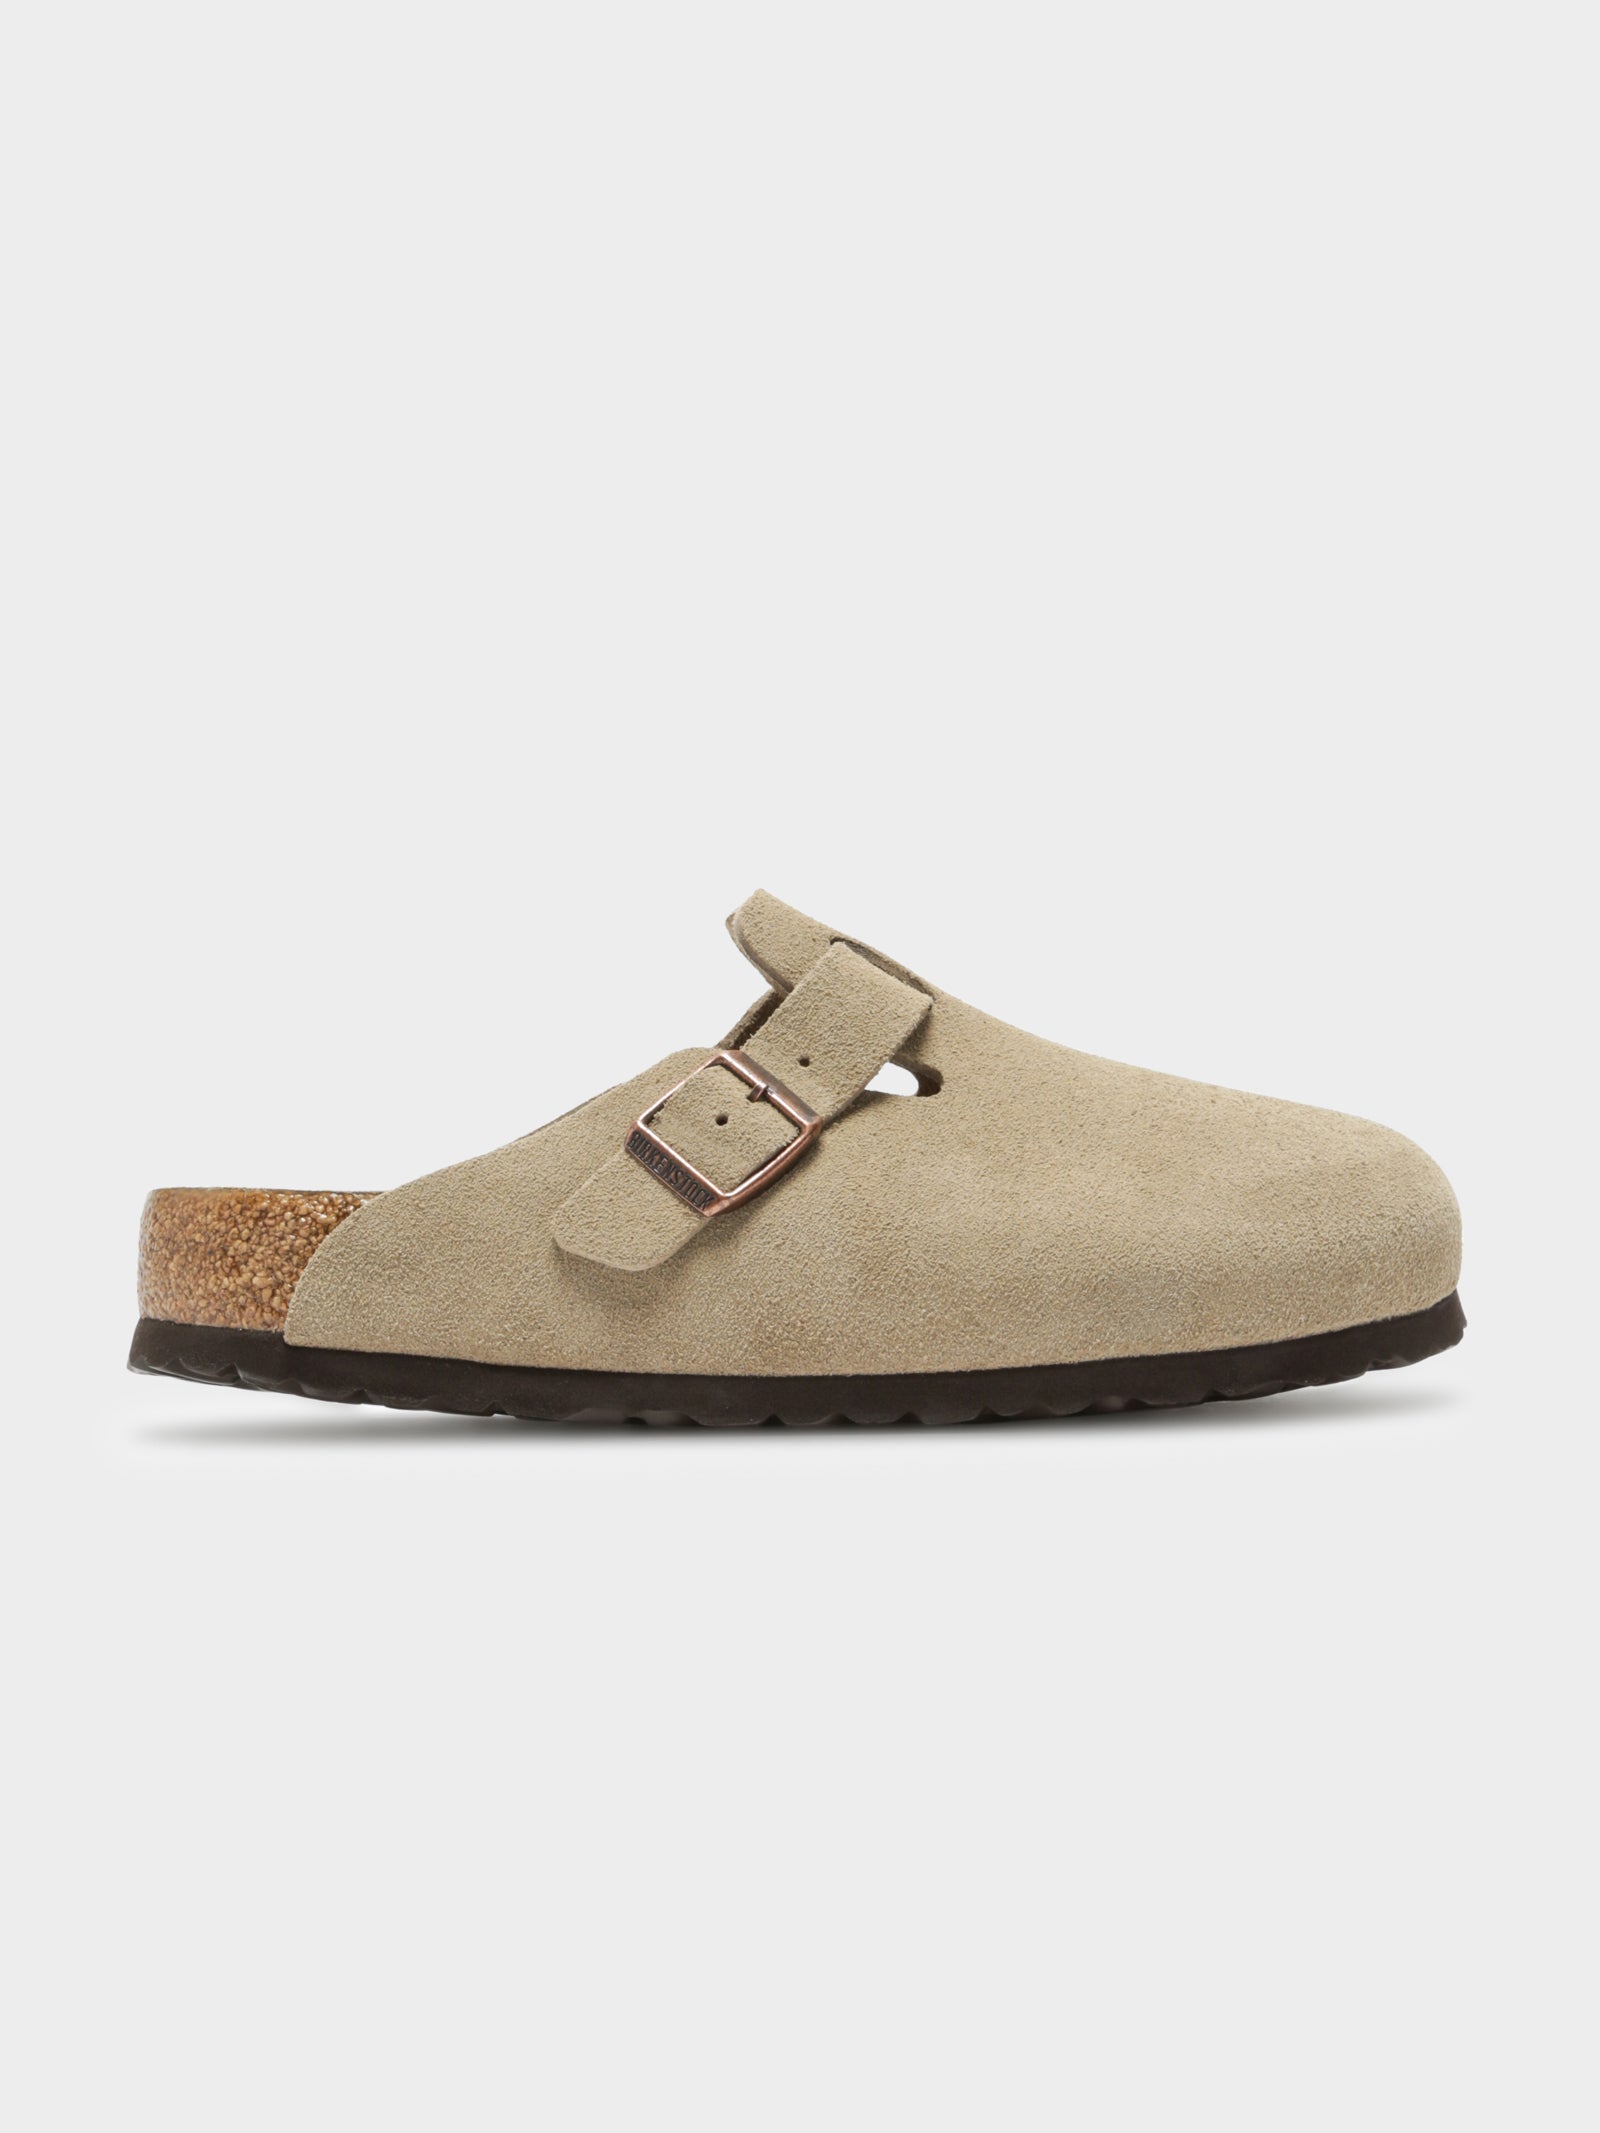 Unisex Boston Soft Footbed Slip-Ons in Taupe Suede Leather - Glue Store